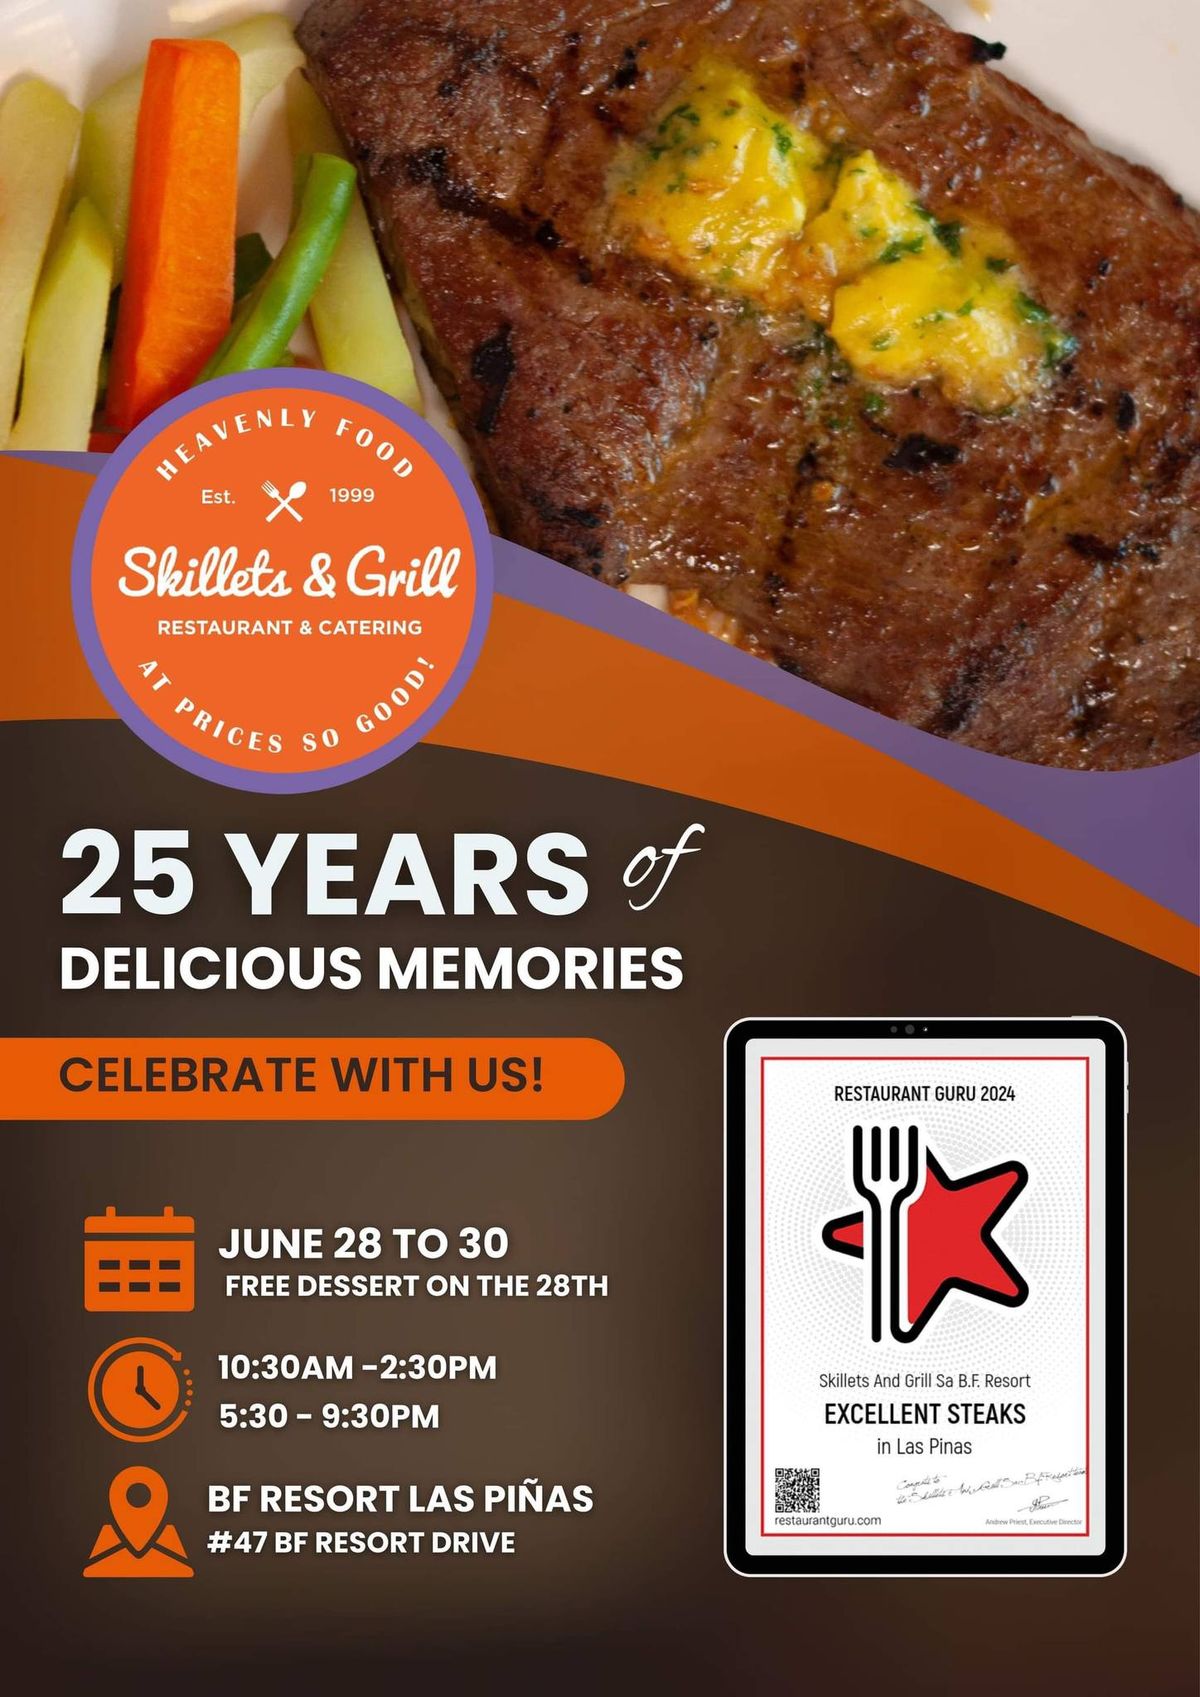 Celebrating 25 Years of Delicious Memories at Skillets and Grill!